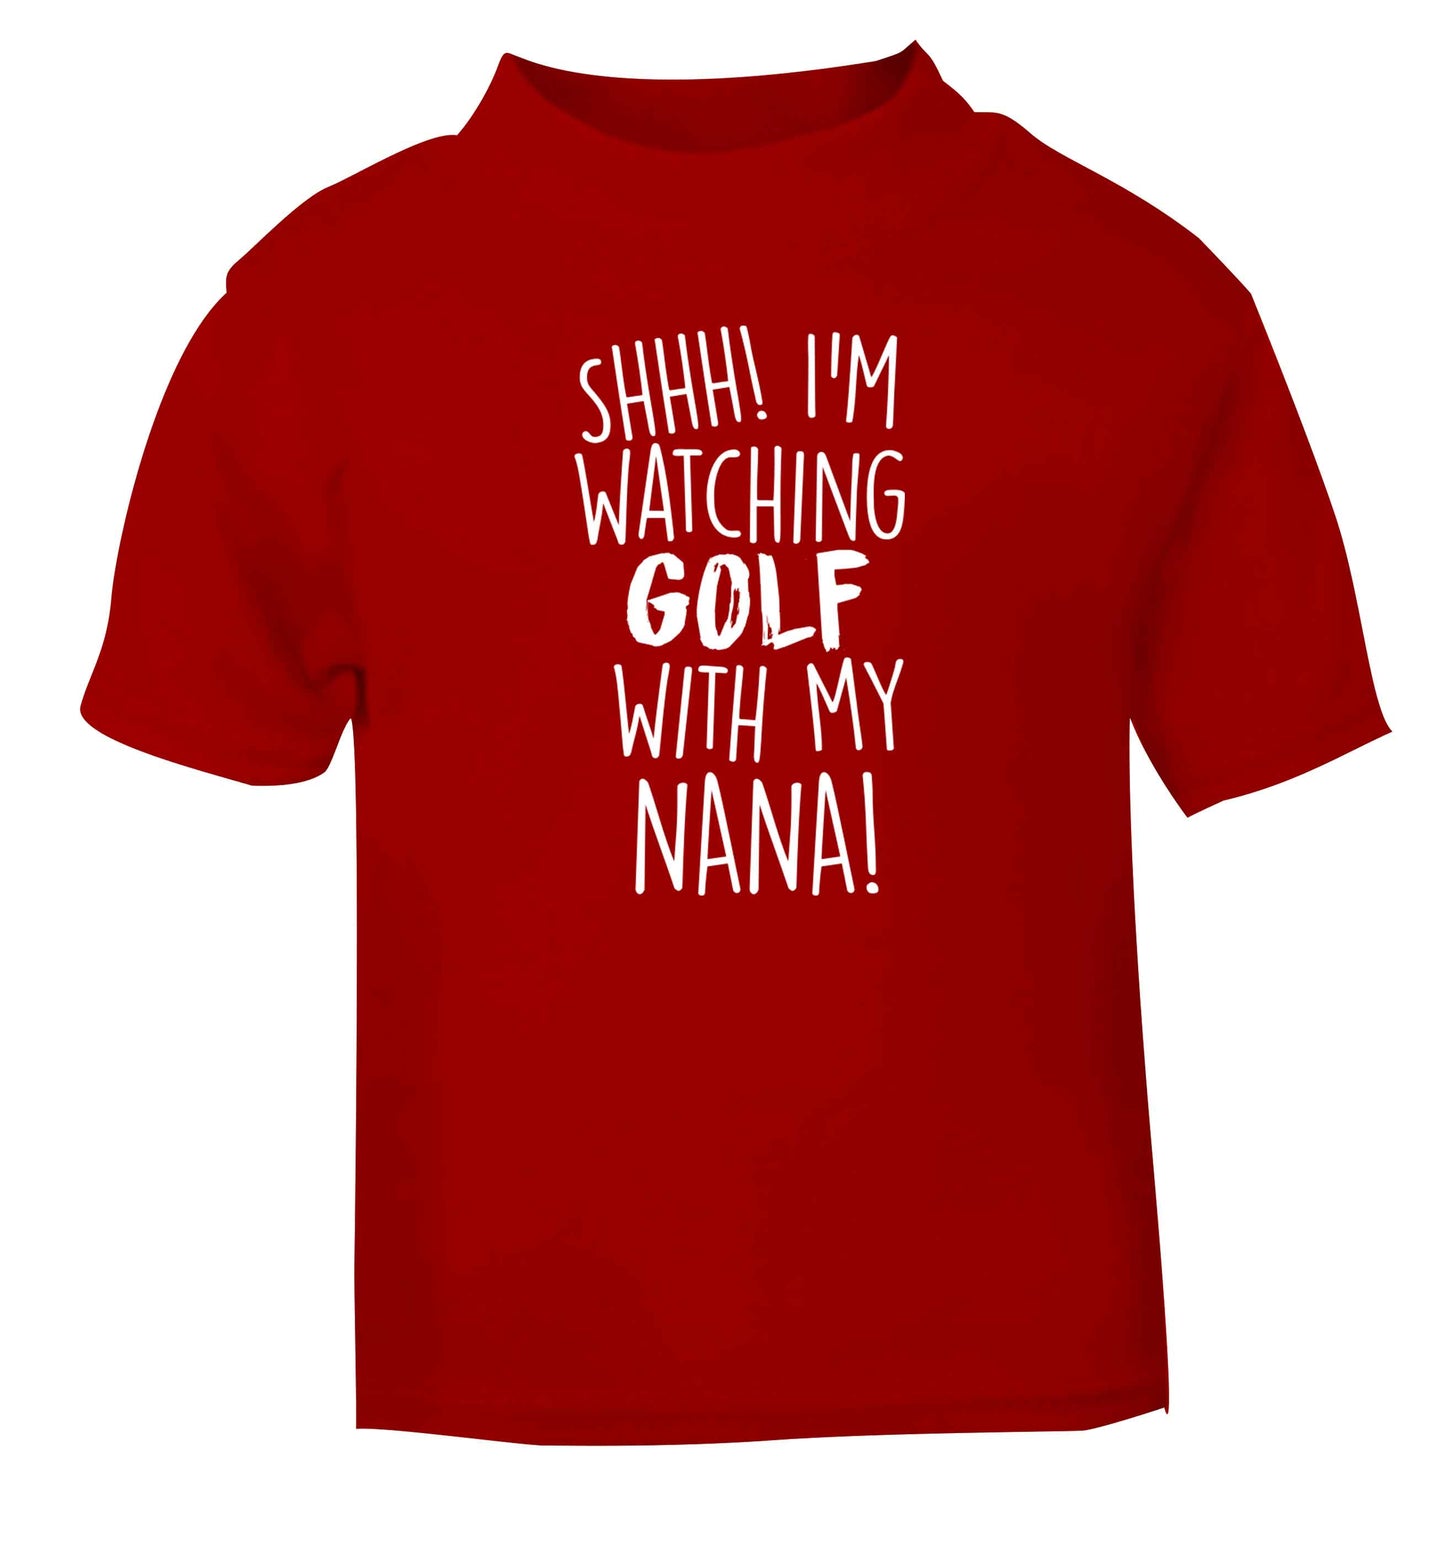 Shh I'm watching golf with my nana red Baby Toddler Tshirt 2 Years